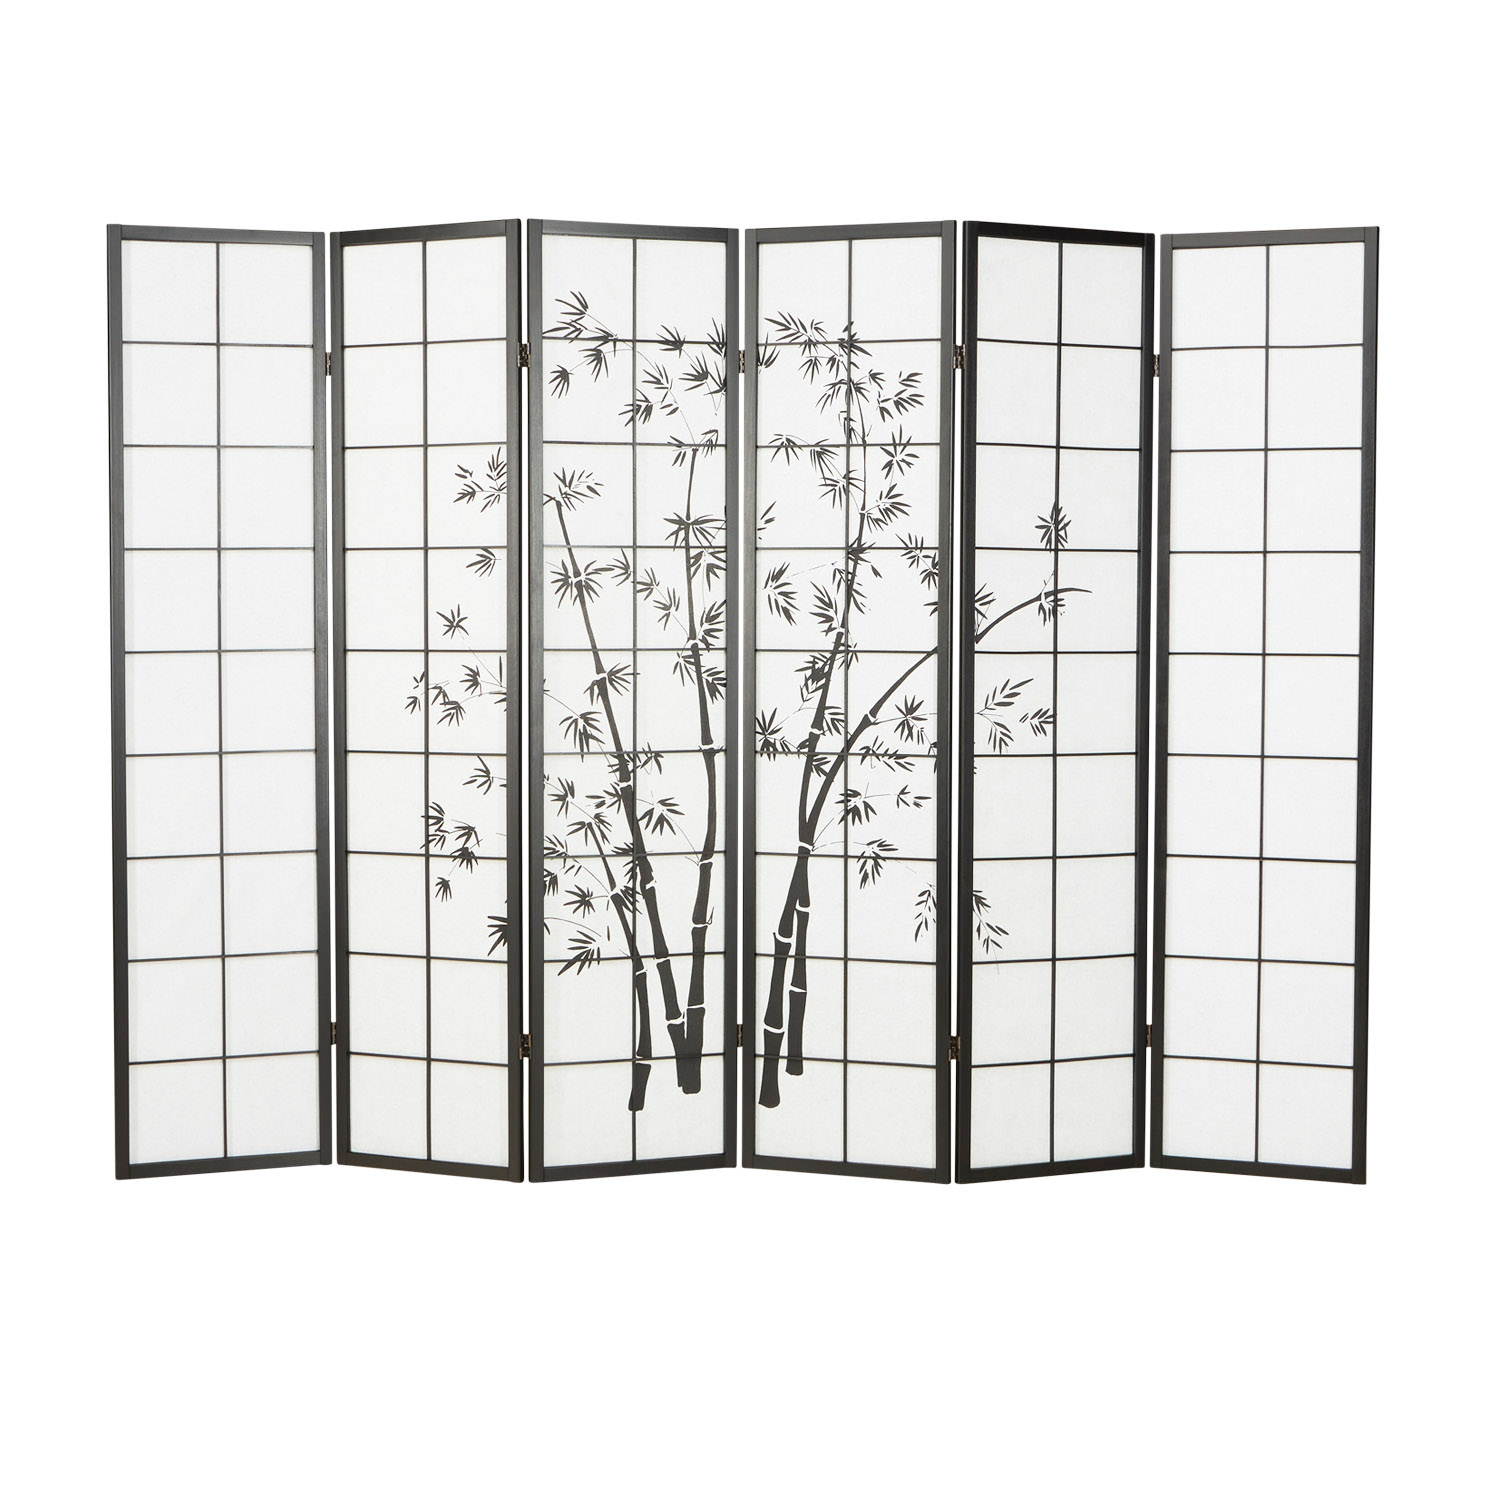 Paravent room divider 6 pieces, wood black, rice paper white, bamboo pattern, height 179 cm	